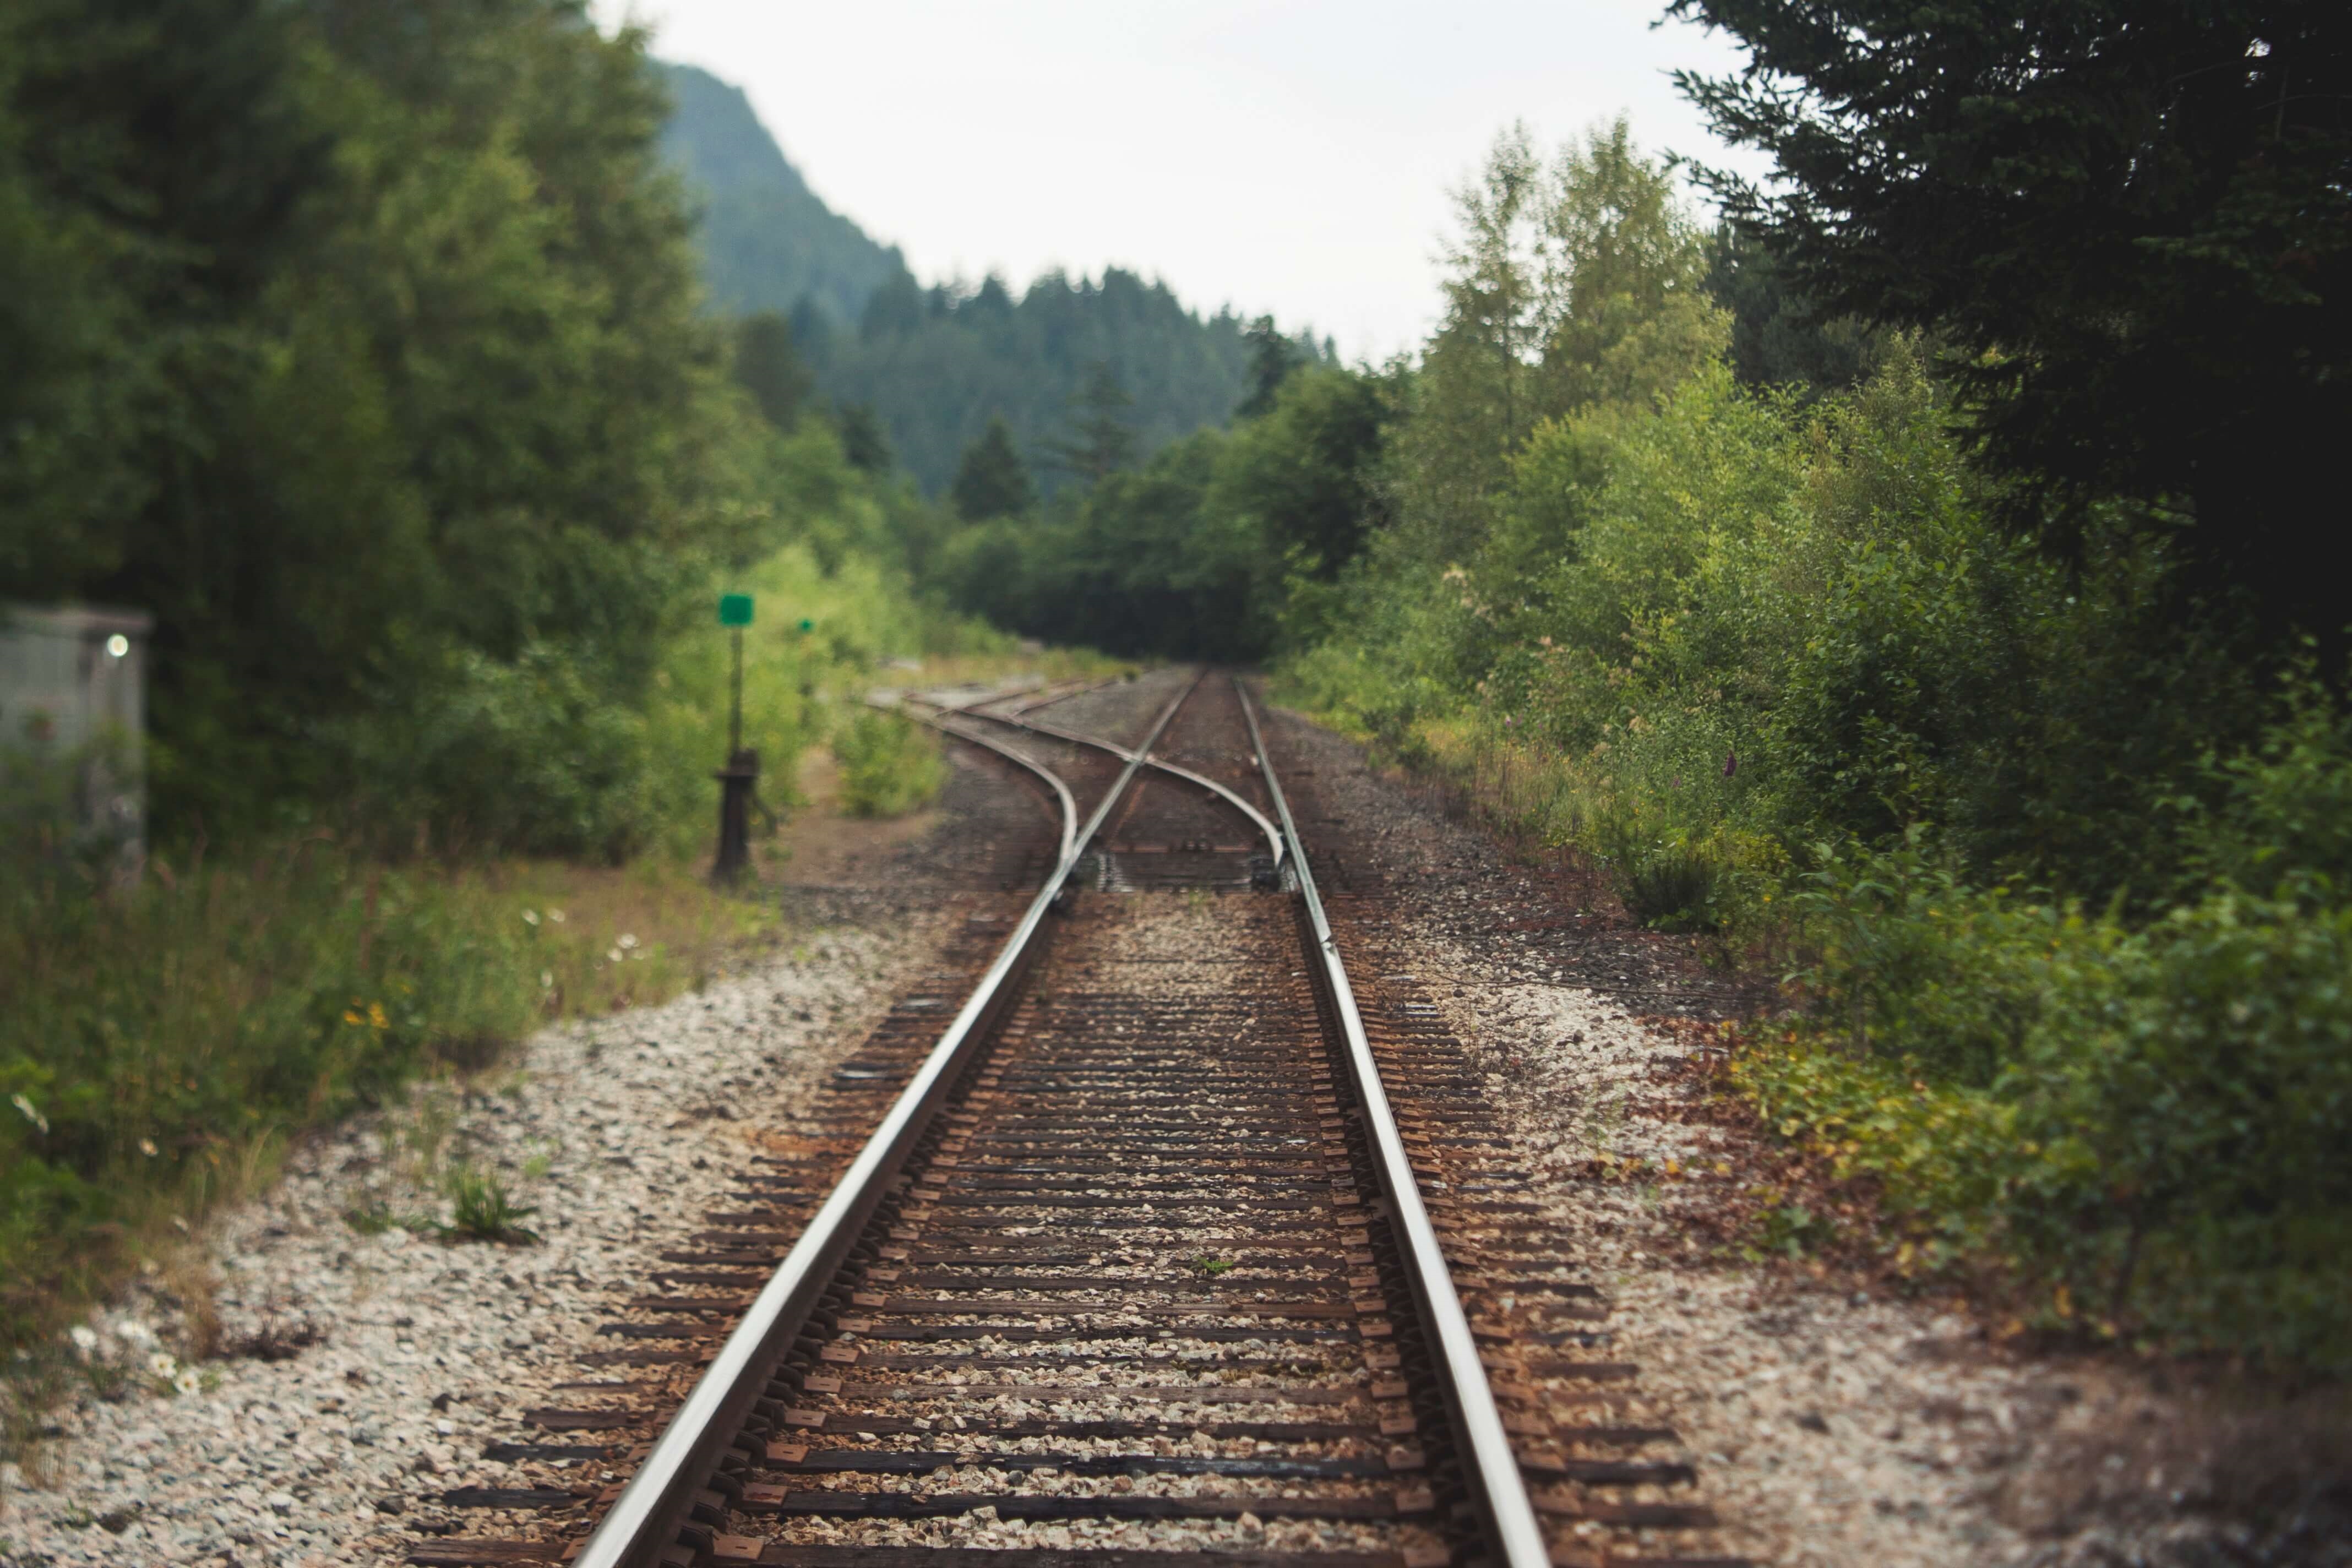 An image of train tracks near a wooded area